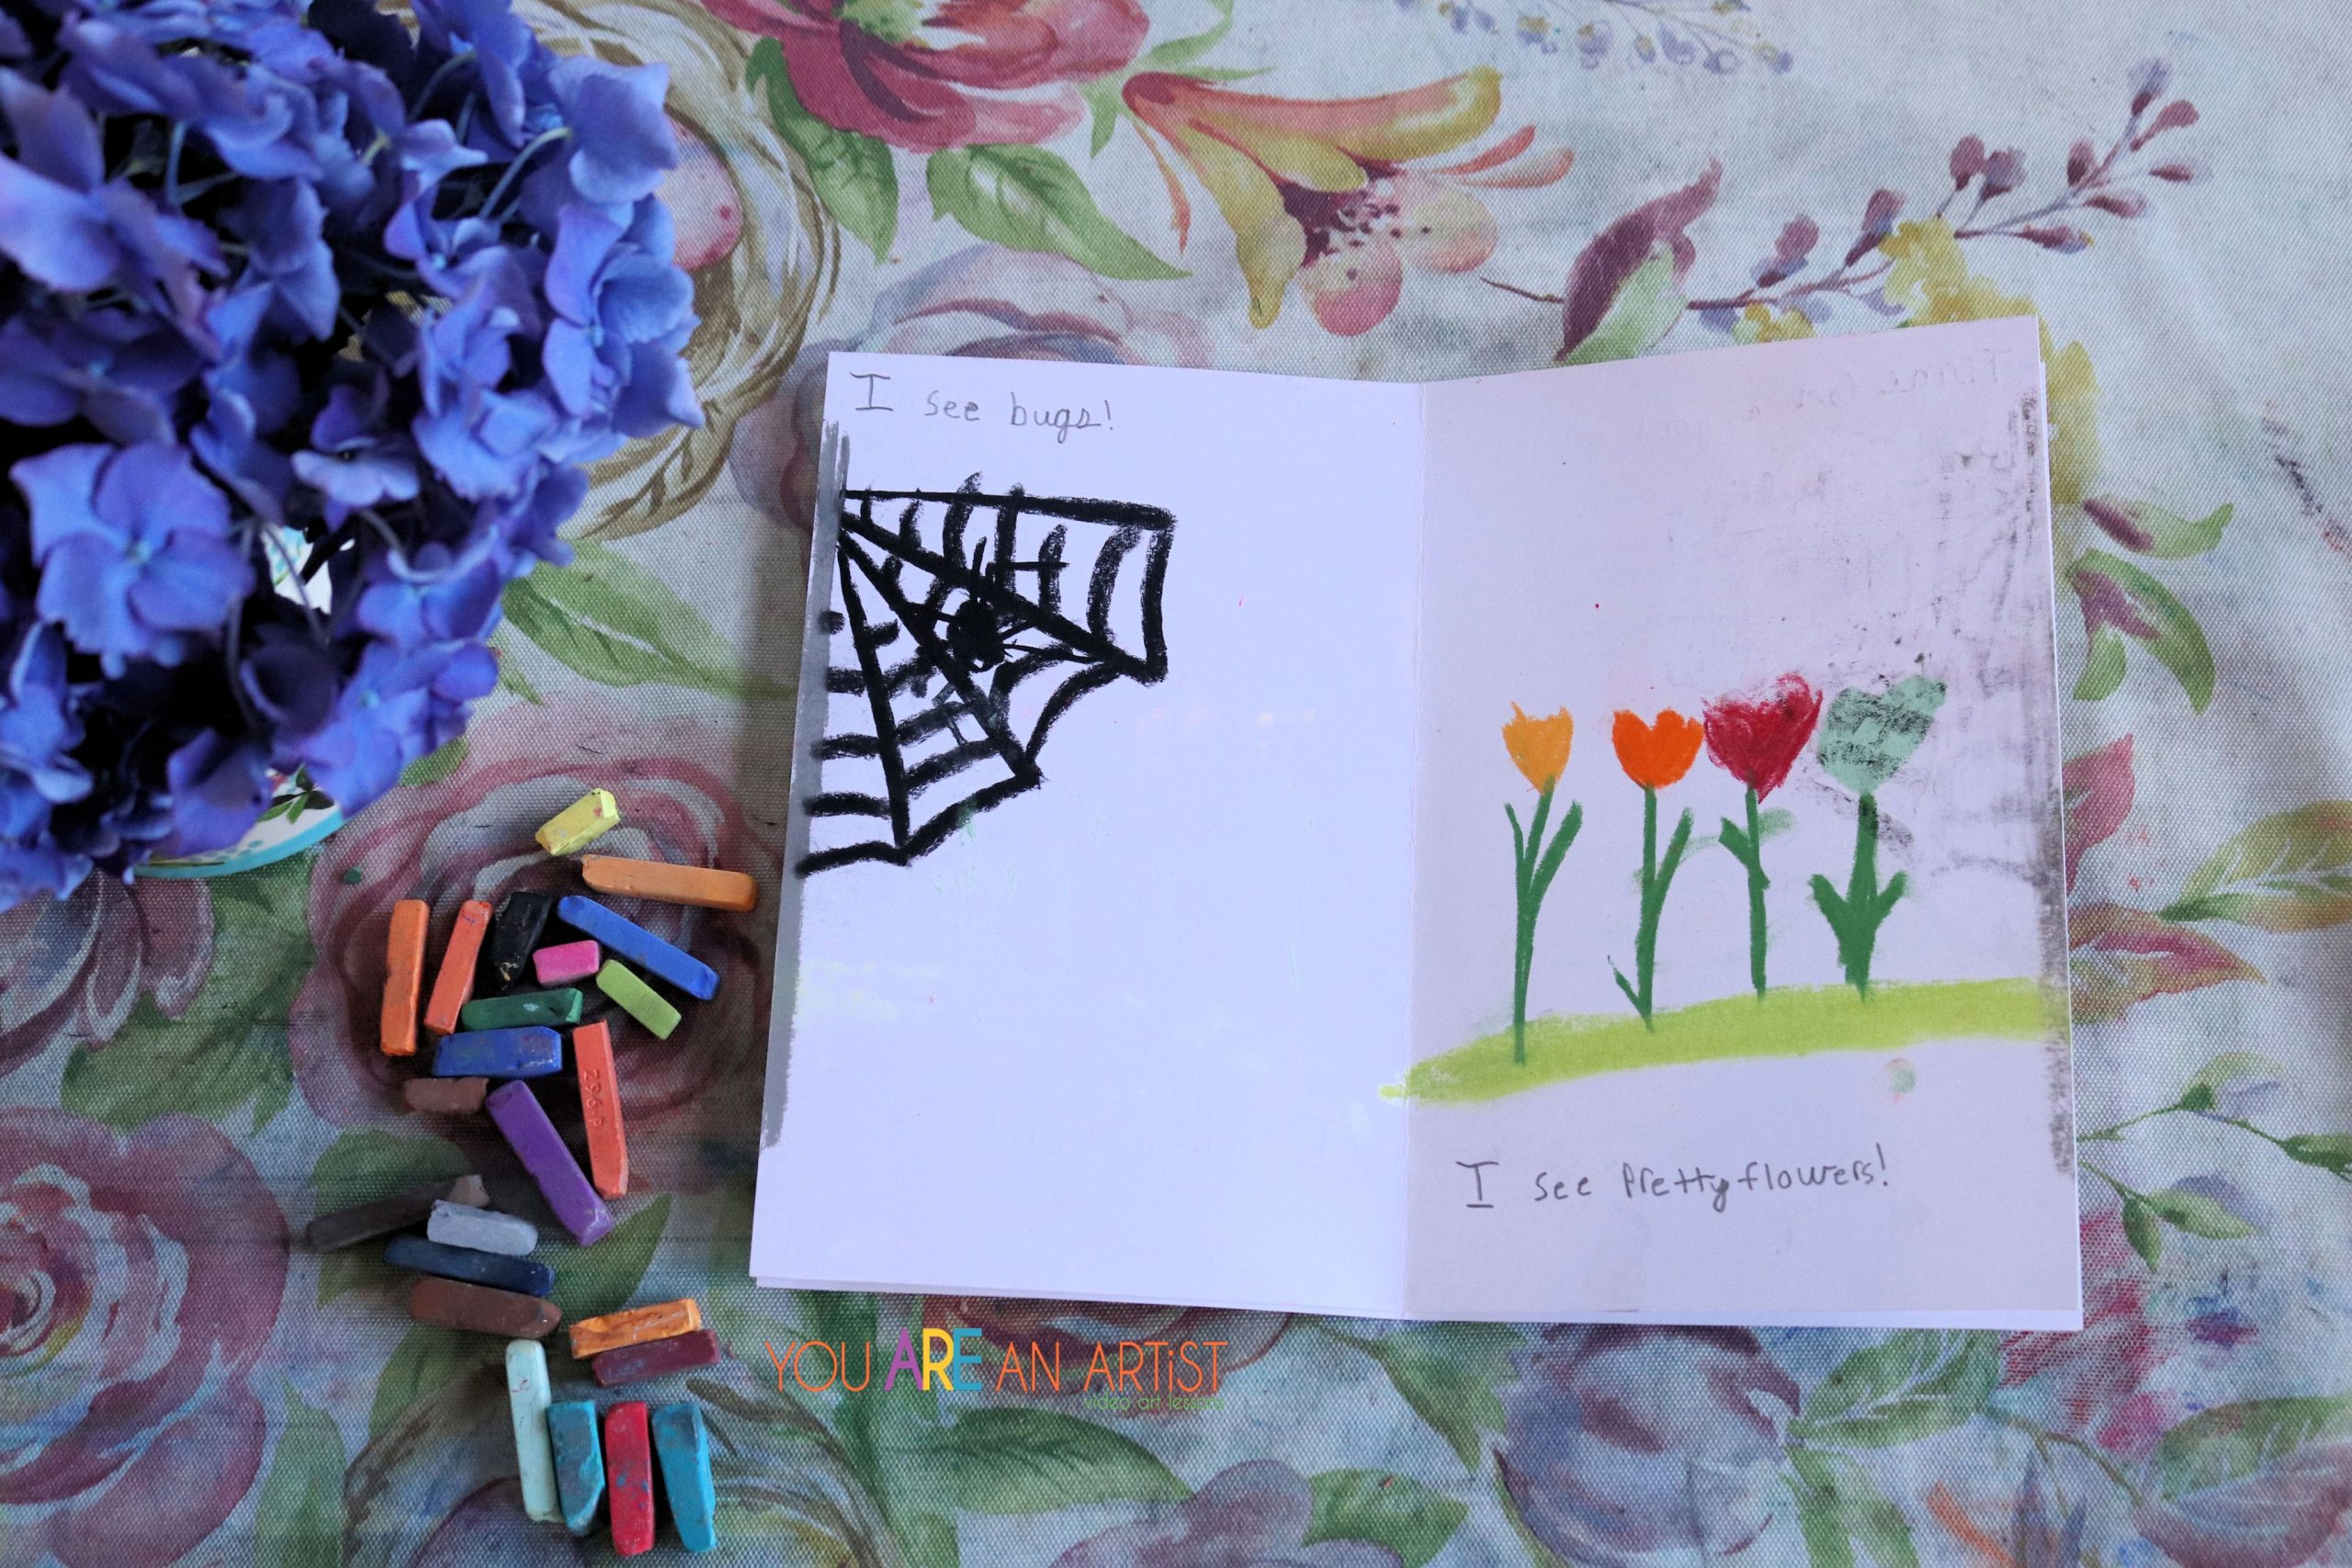 Learning to read with art embraces more than meets the eye. Let’s take a peek at these creative sight word activities for your homeschool. It's fun for the whole family!